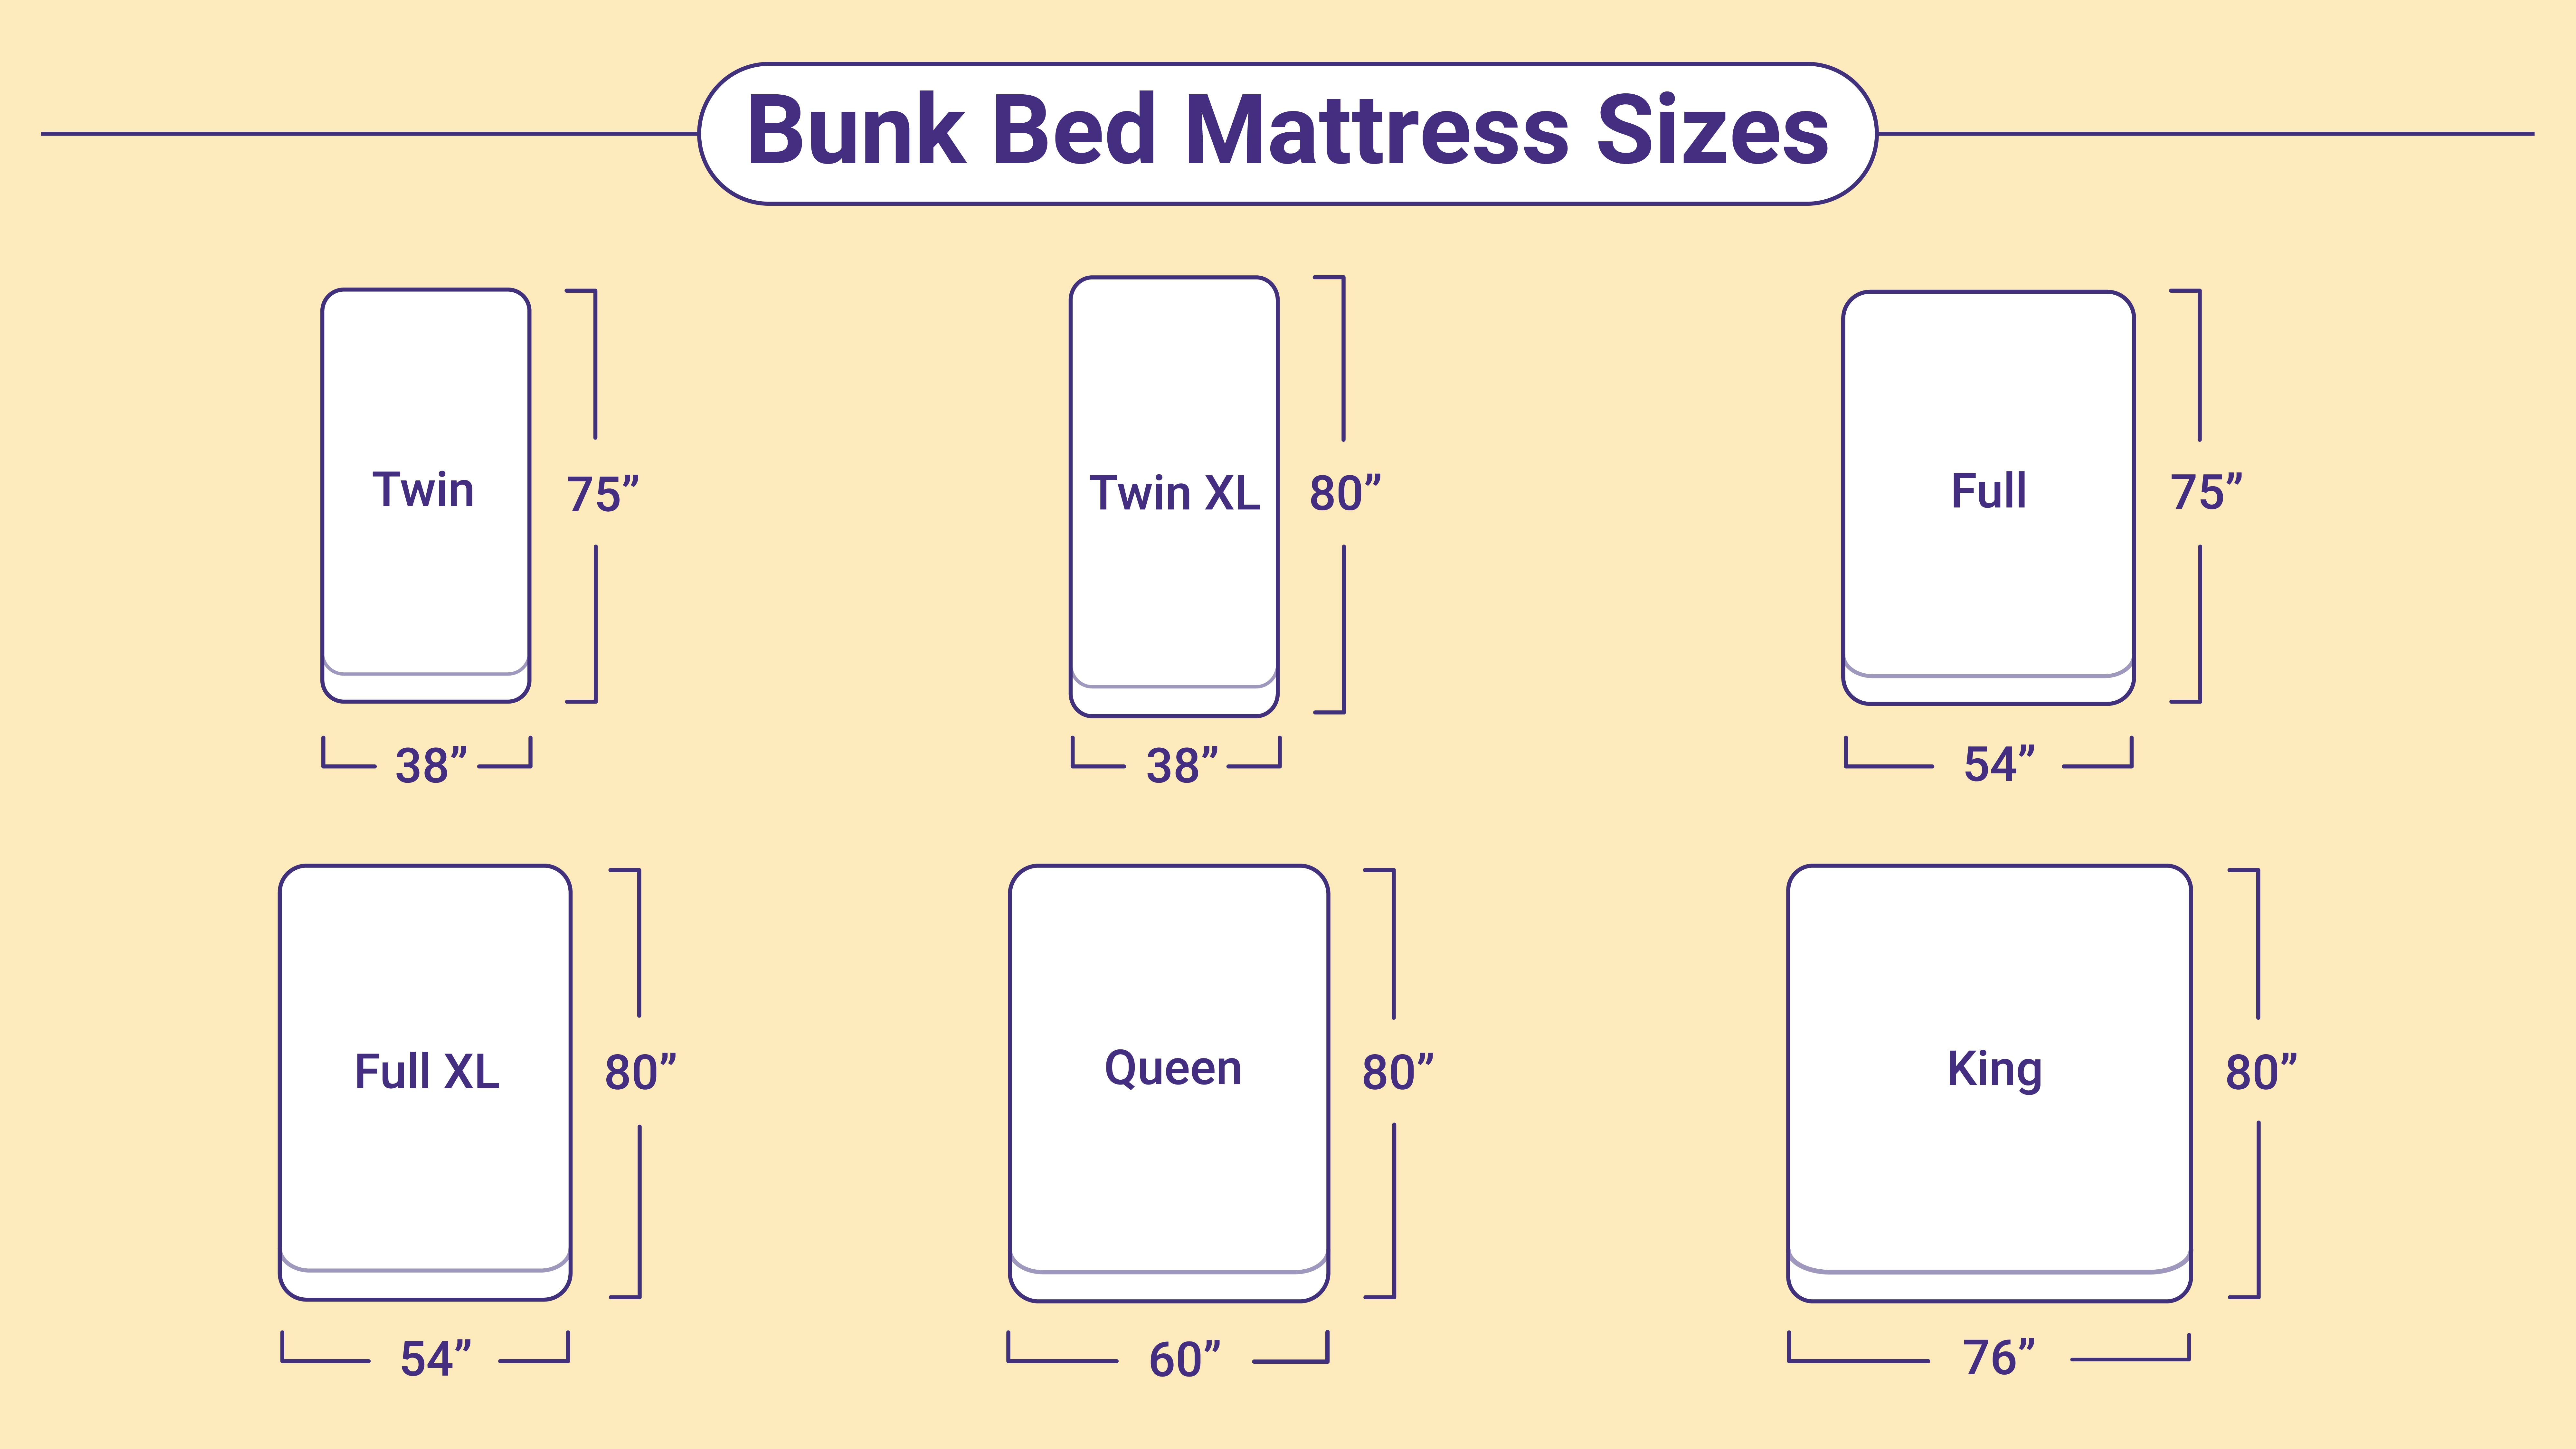 Bunk Bed Mattress Sizes And Dimensions, Bunk Bed Size